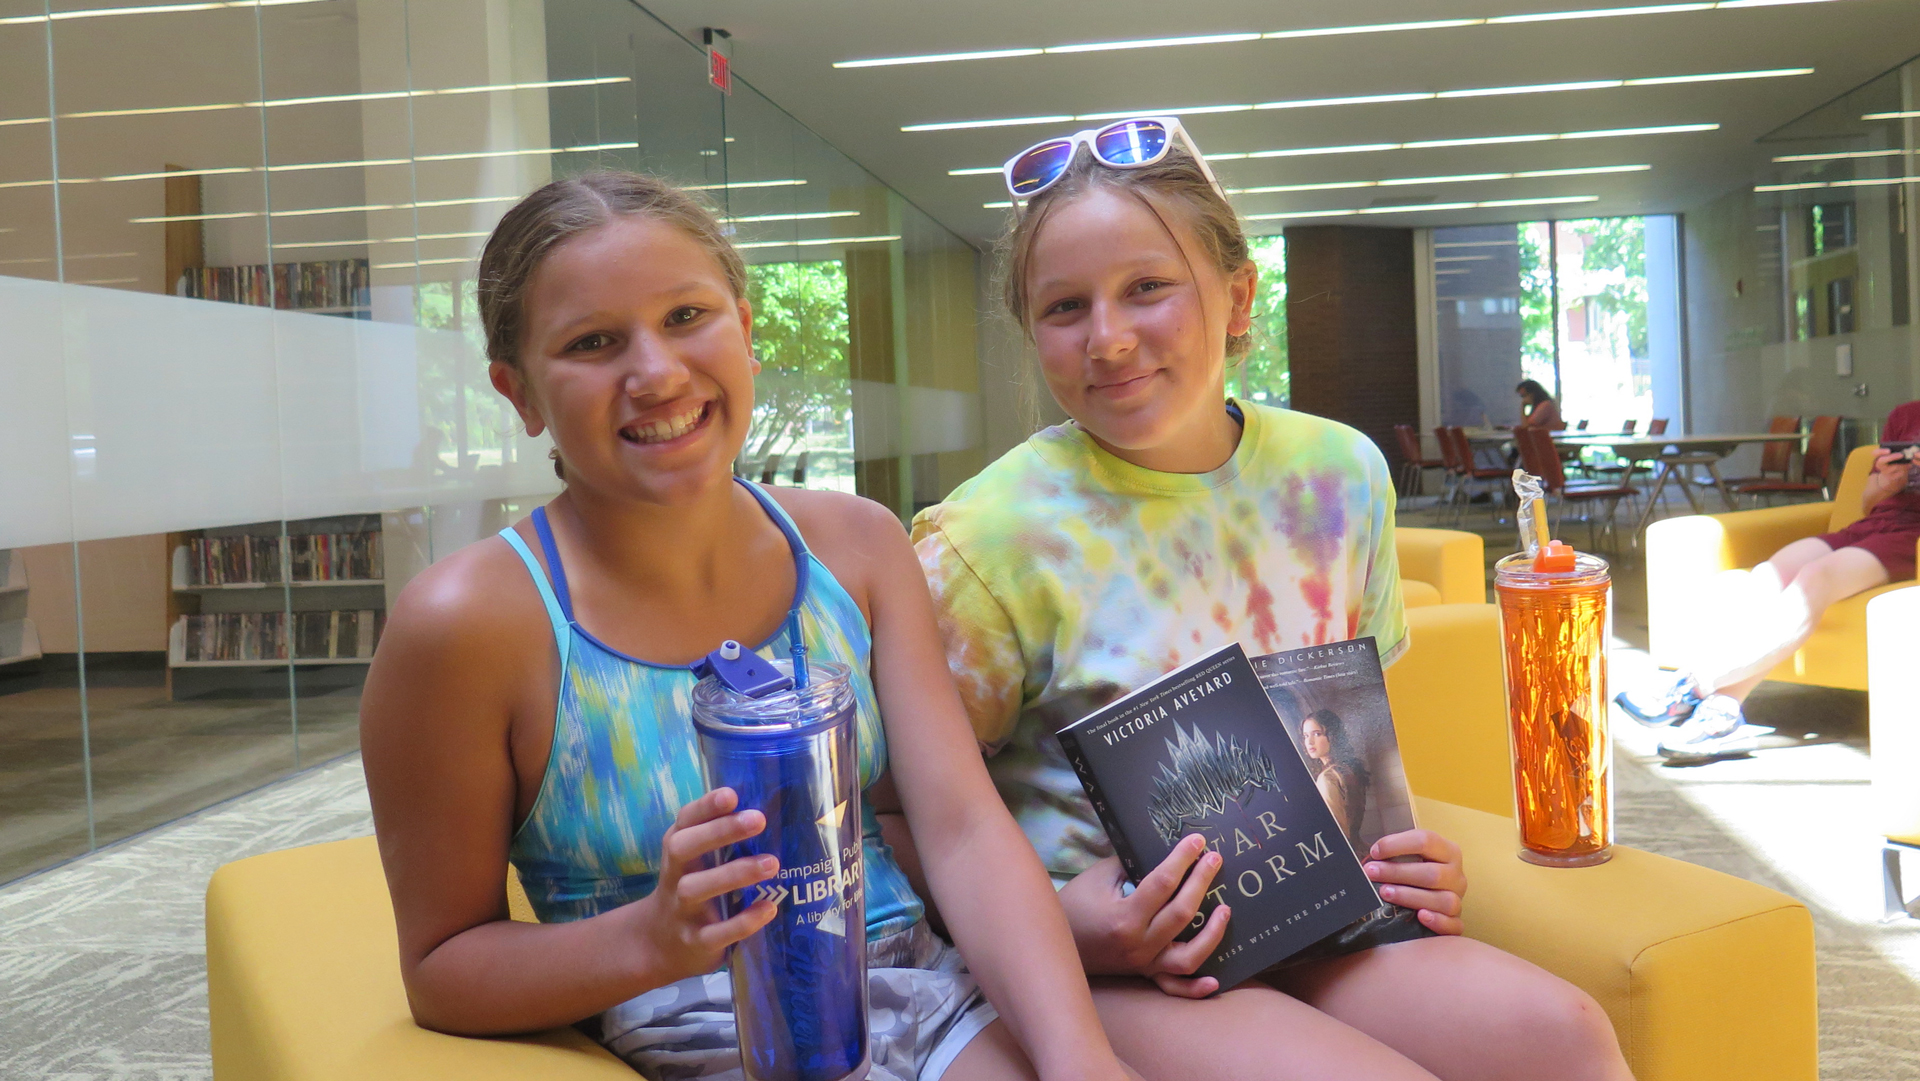 2 teens smiling, holding prize books, tumblers, in library